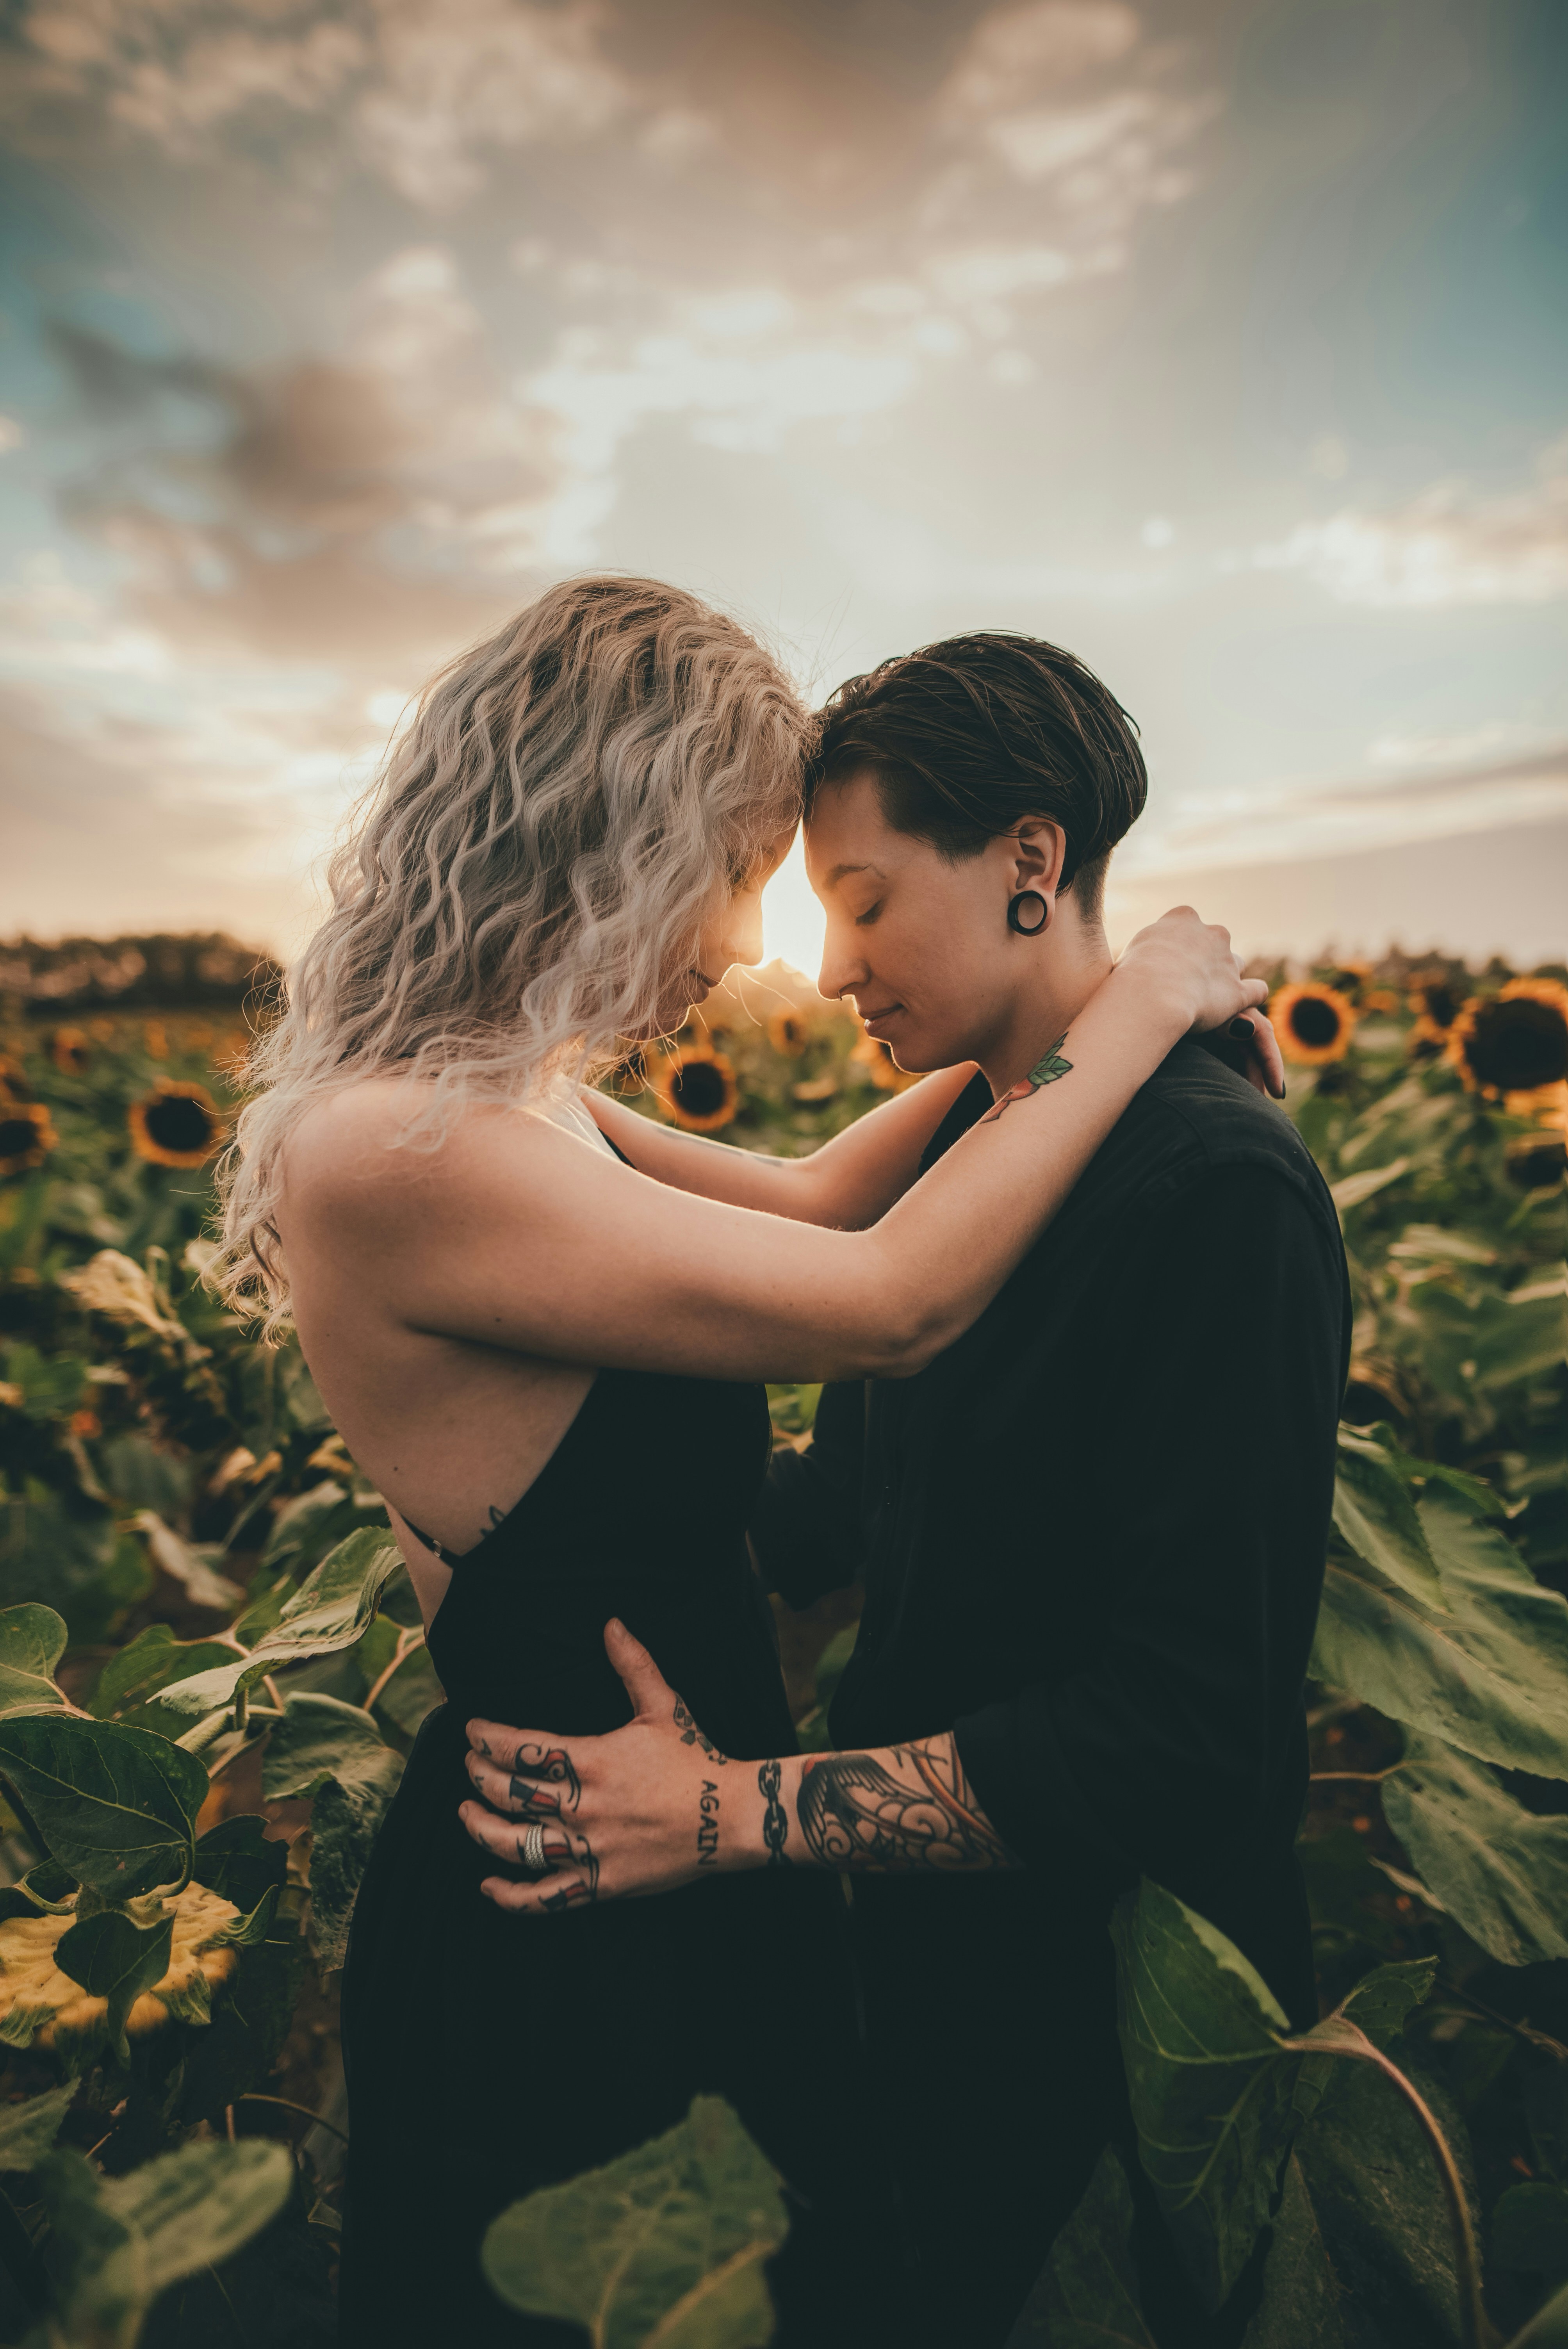 Choose from a curated selection of hug photos. Always free on Unsplash.